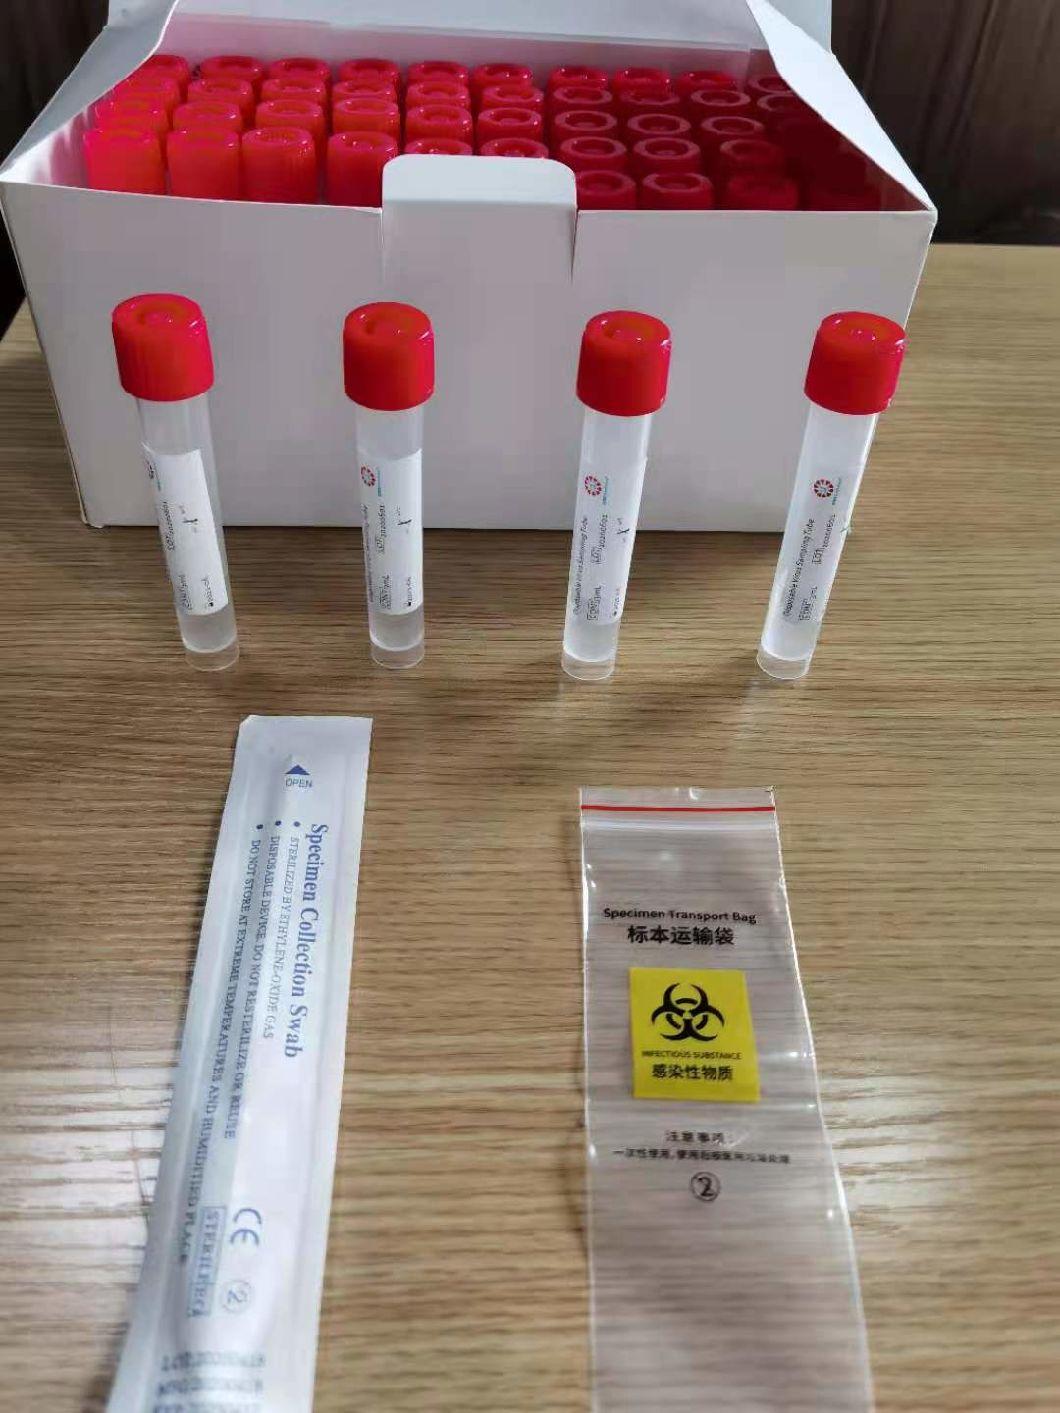 Disposable Virus Specimen Collection Swab Tube for Influenza, Bird Flu, Hpv, Hand-Foot-Mouth Disease, Measles